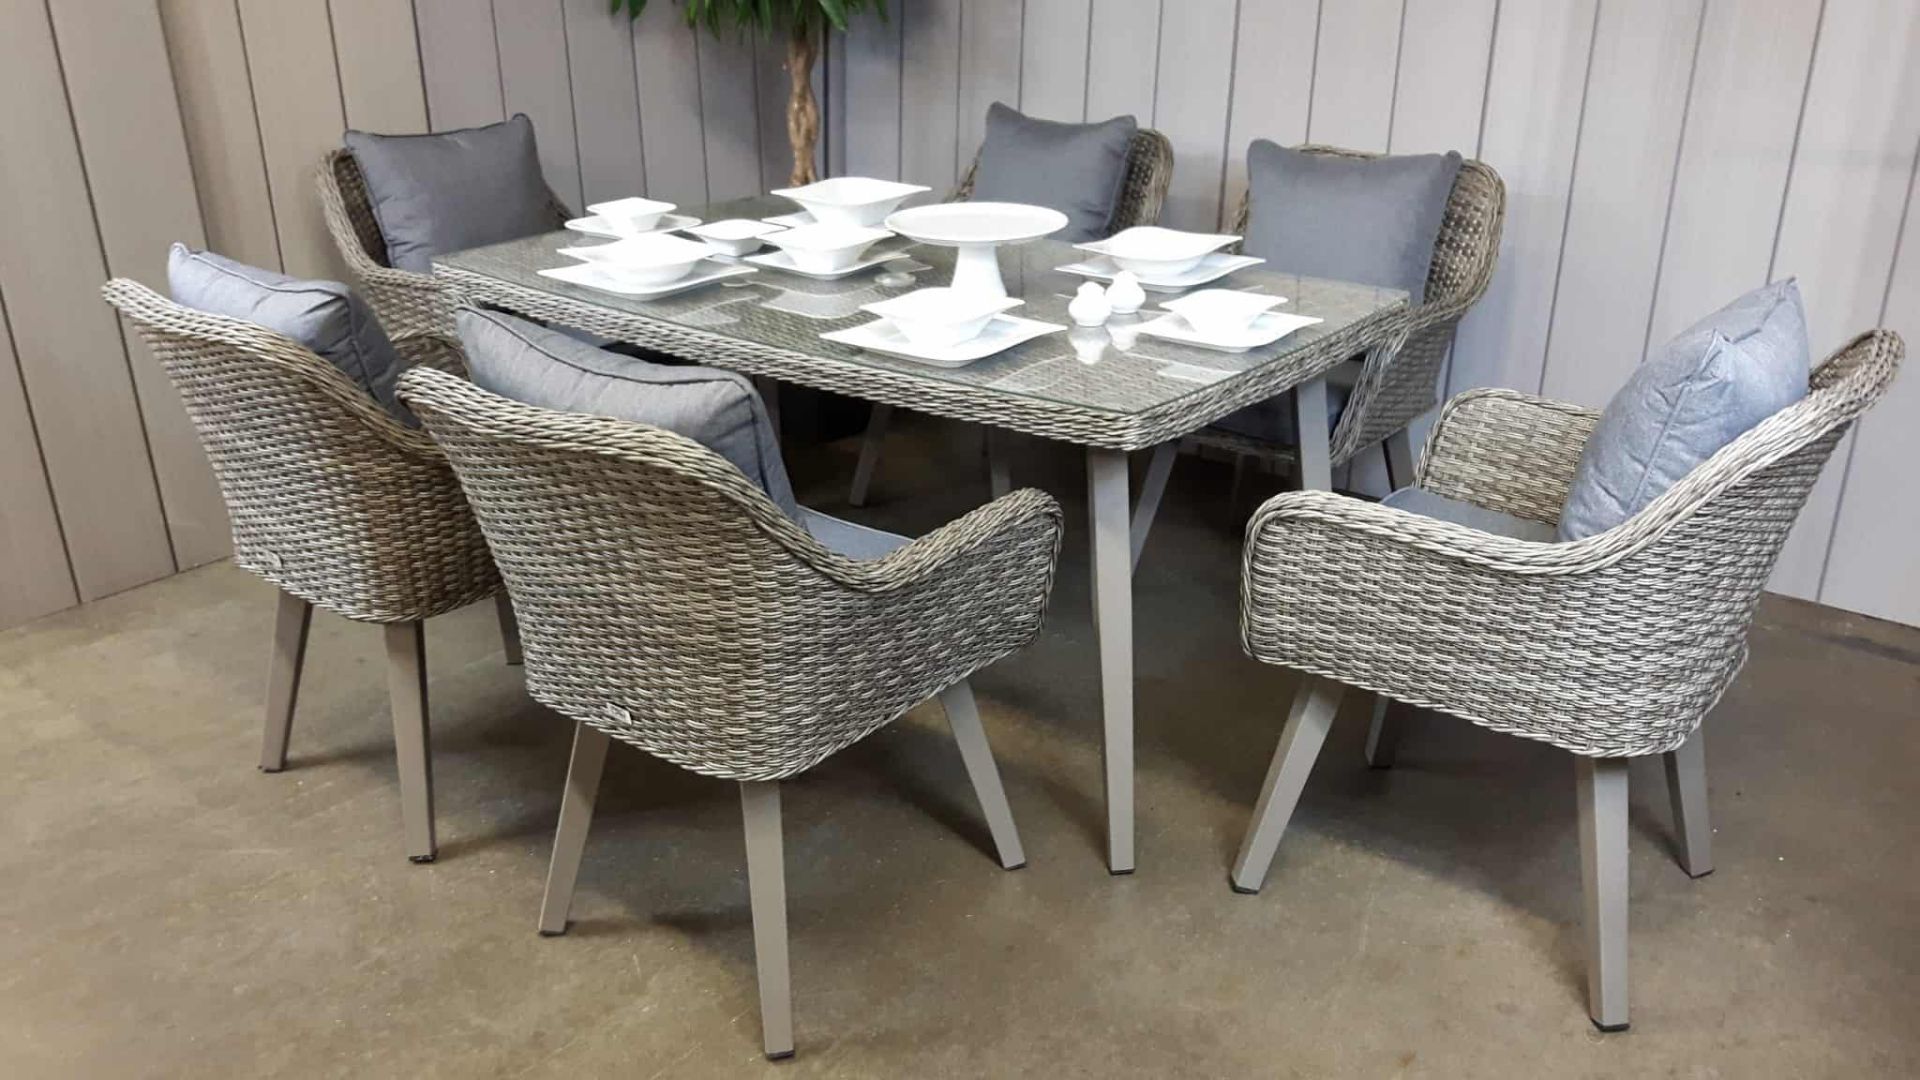 NEW 2019 Hardingham 7 Piece Contemporary All Weather Dining Set - Image 6 of 7